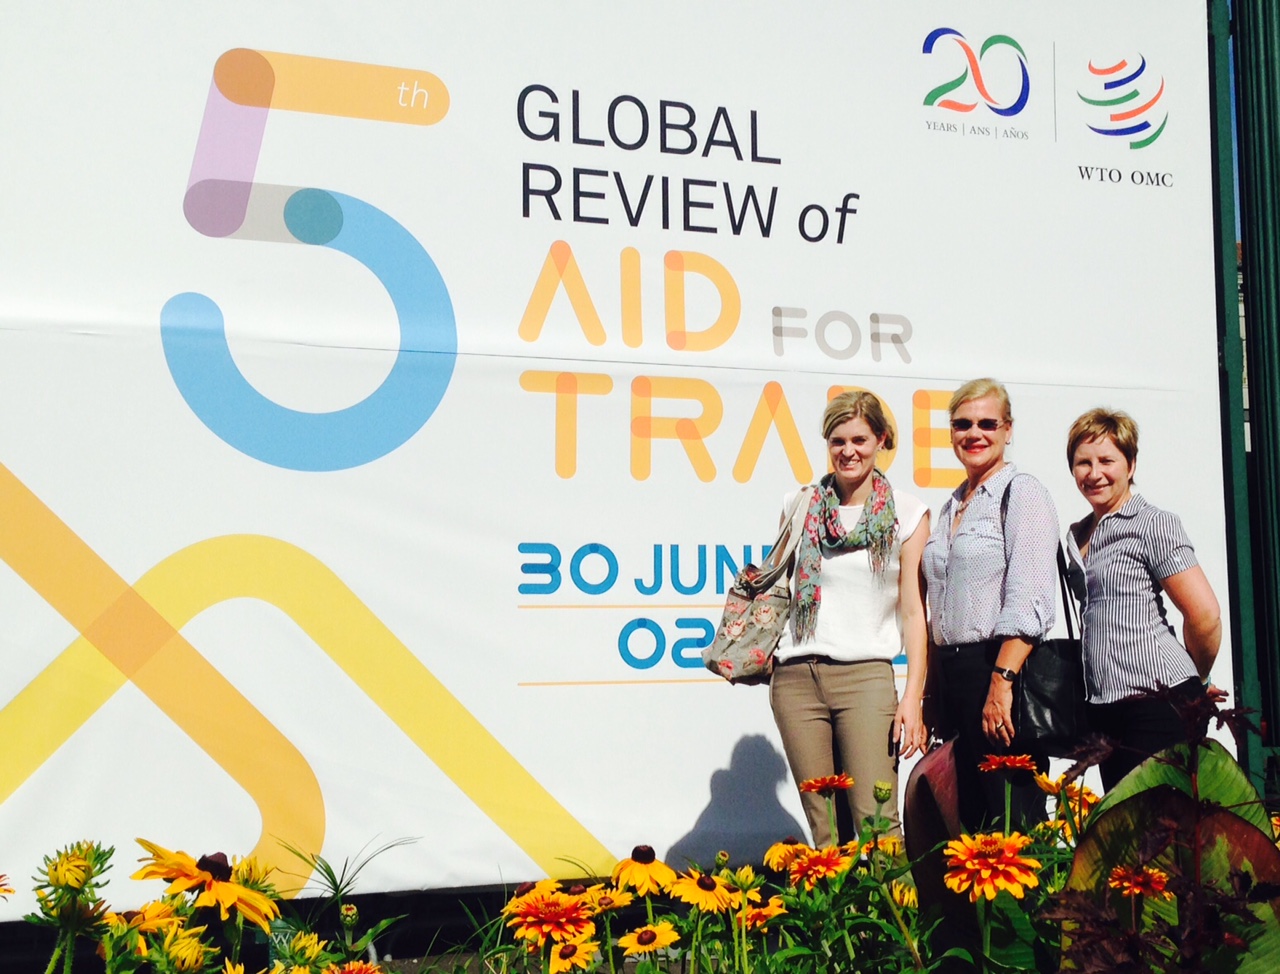 Dr Ermie Steenkamp, Prof Wilma Viviers and Dr Sonja Grater at the Fifth Global Review of Aid for Trade held at the World Trade Organization (WTO) from June 30th to July 2nd 2015